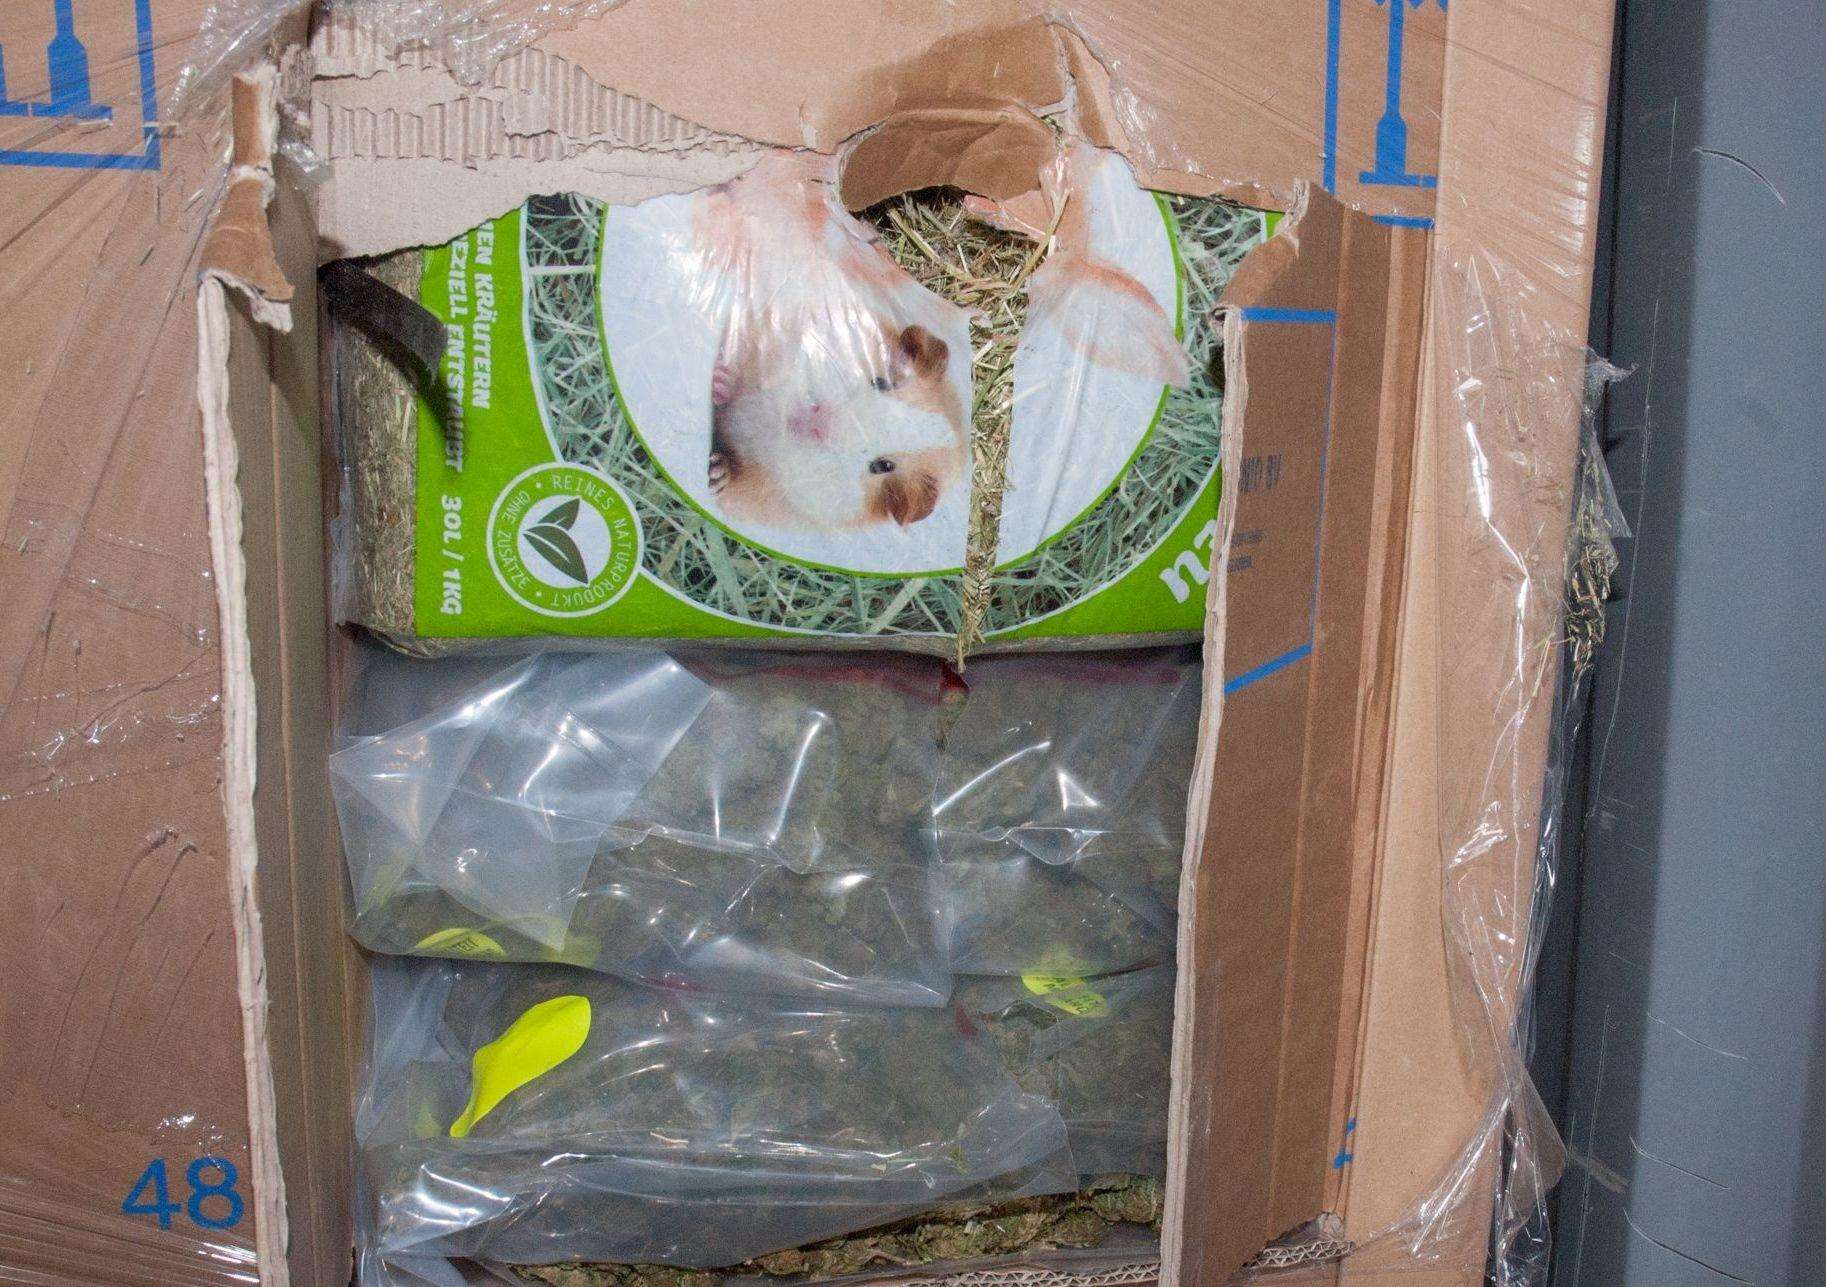 The drugs were found hidden underneath hay. Picture: Kent Police. (4329743)